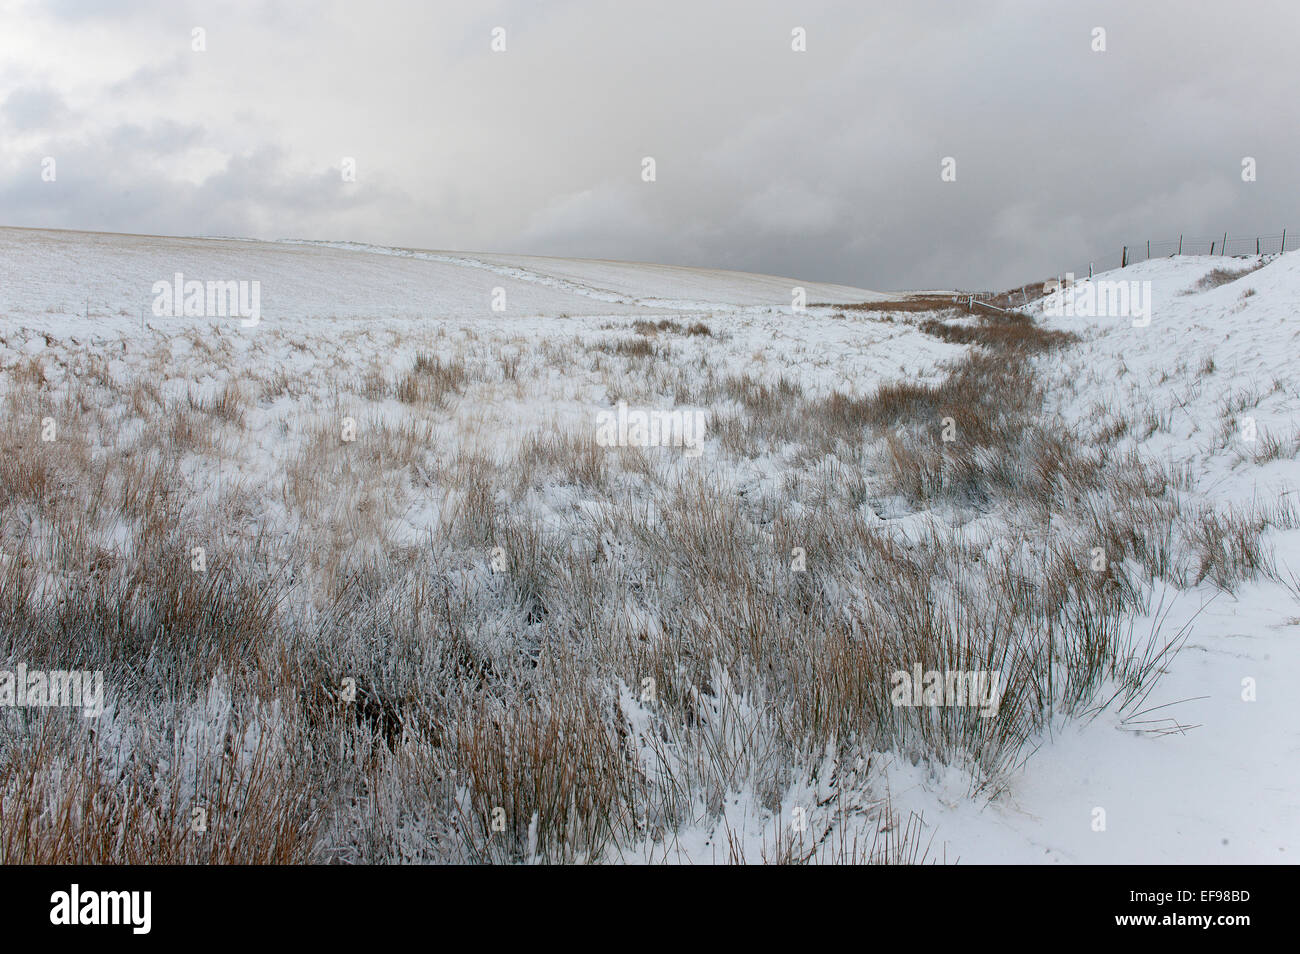 Mynydd Epynt, Powys, Wales, UK. 29th January, 2015. UK Weather: A wintry landscape on the Mynydd Epynt high moorland range of hills in Powys, Mid Wales.  Credit:  Graham M. Lawrence/Alamy Live News. Stock Photo